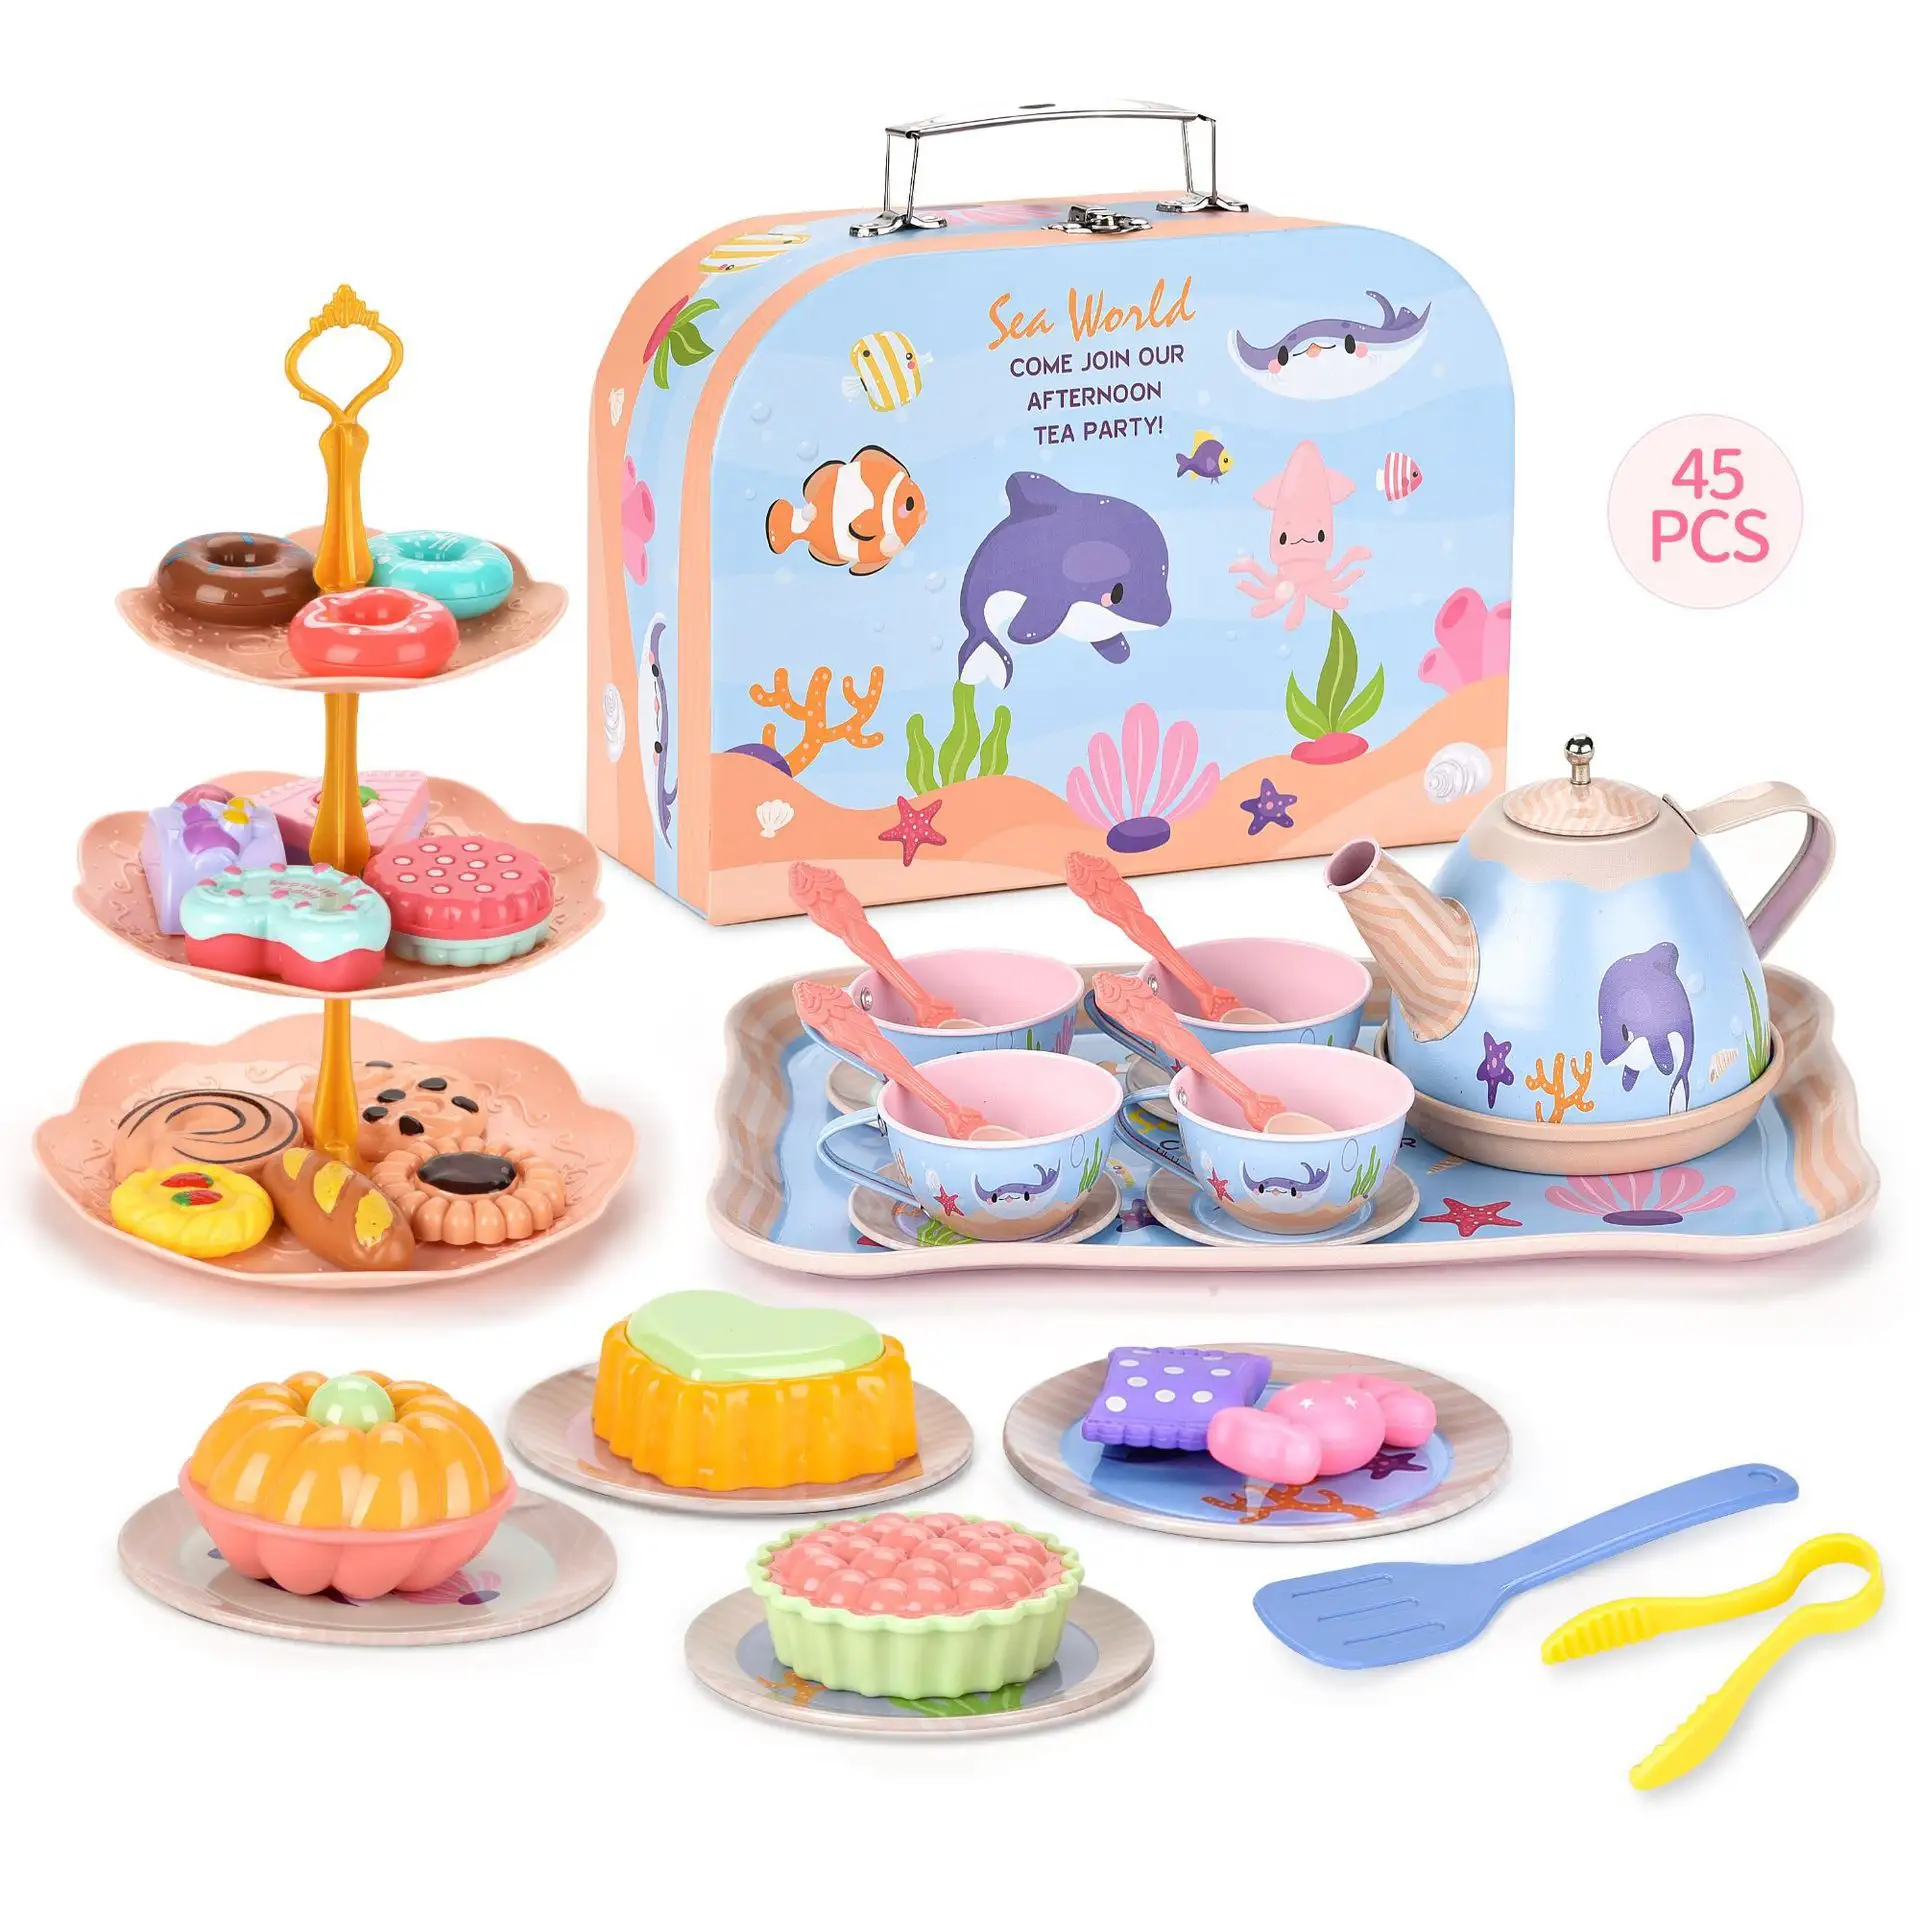 Girls Toys DIY Pretend Play Toy Simulation Tea Food Cake Set Play House Kitchen Afternoon Tea Game Toys Gifts For Children Kids